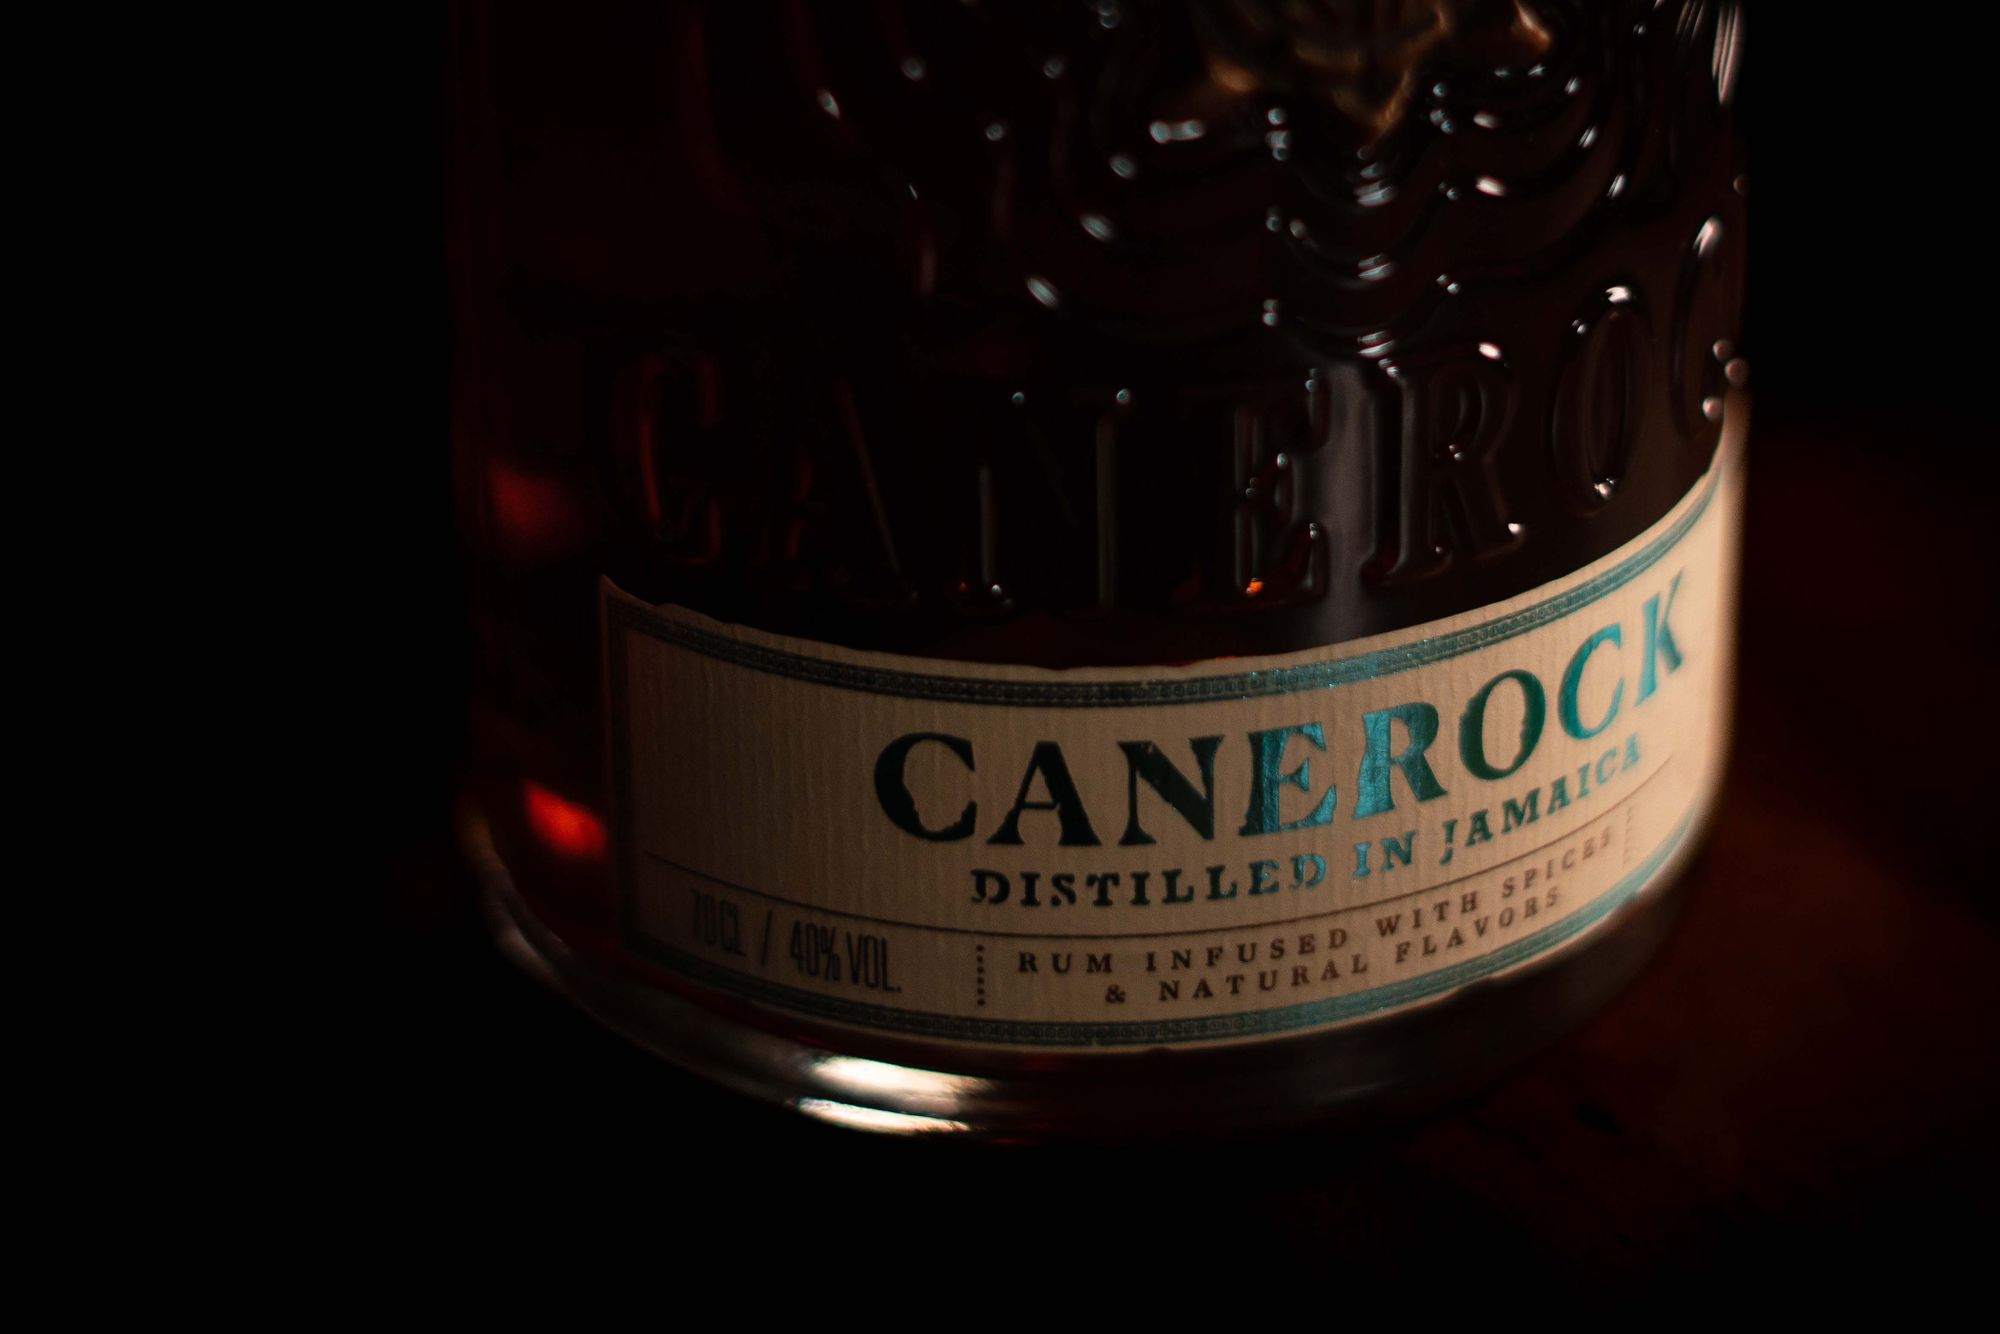 Canerock is the latest from Maison Ferrand. Photo: Boothby